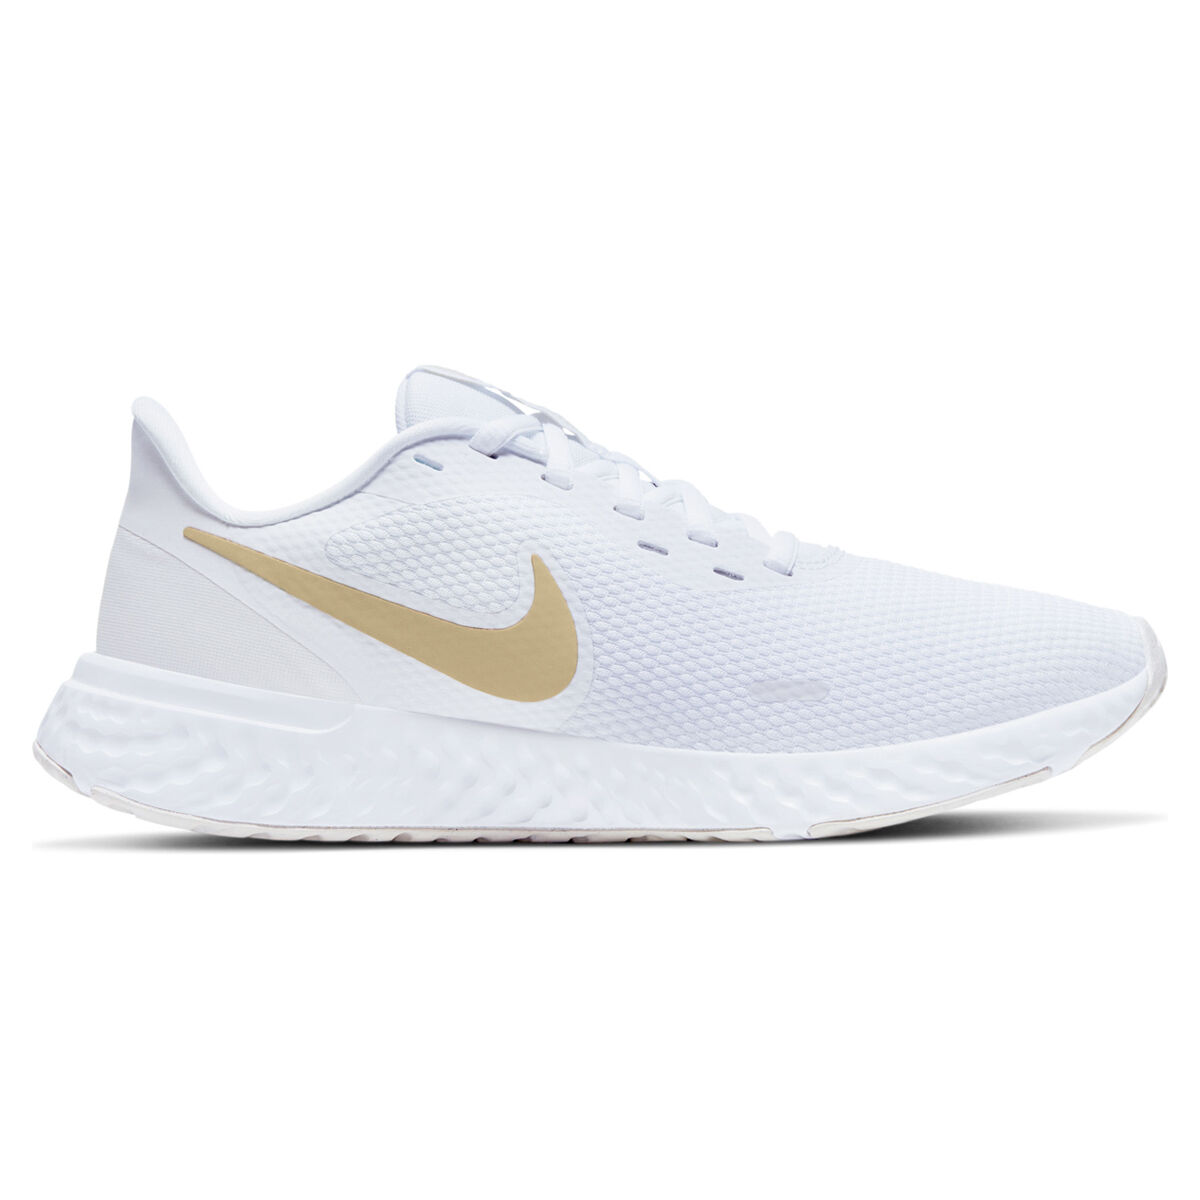 white and gold nike shoes